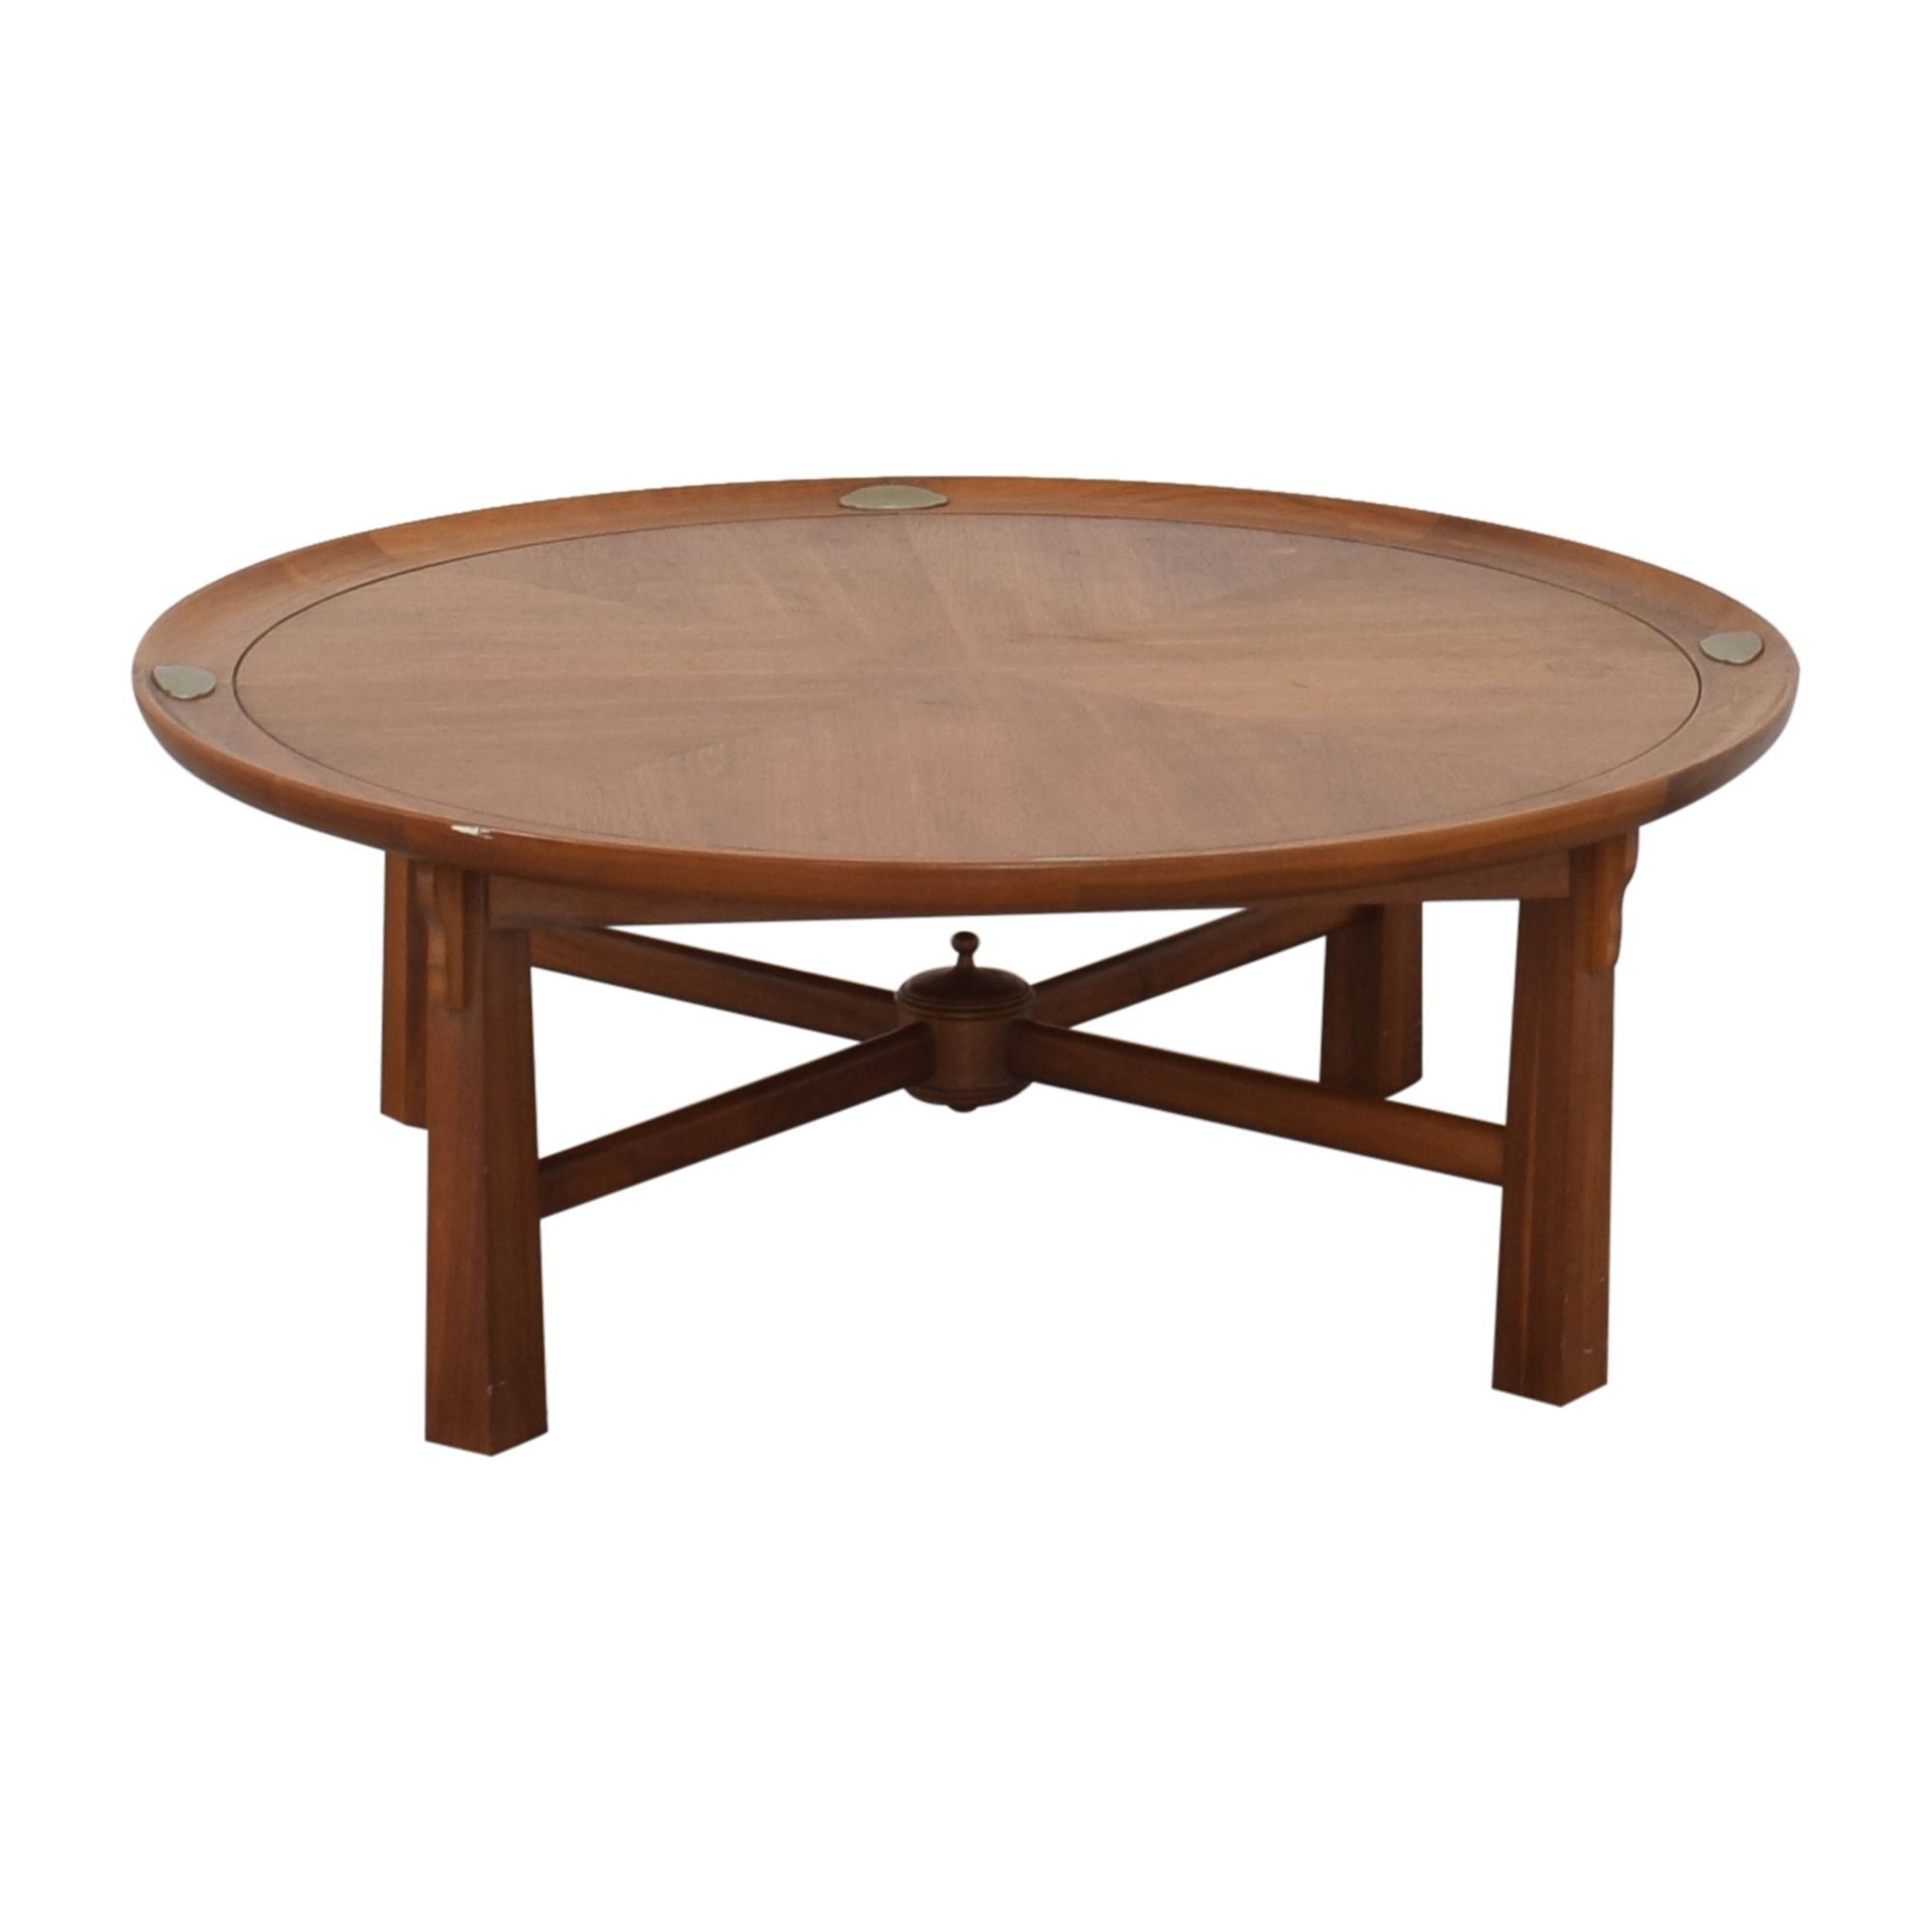 [%72% Off – Heritage Henredon Heritage Henredon Round Coffee Table / Tables In Latest American Heritage Round Coffee Tables|american Heritage Round Coffee Tables Pertaining To Well Liked 72% Off – Heritage Henredon Heritage Henredon Round Coffee Table / Tables|most Current American Heritage Round Coffee Tables Regarding 72% Off – Heritage Henredon Heritage Henredon Round Coffee Table / Tables|fashionable 72% Off – Heritage Henredon Heritage Henredon Round Coffee Table / Tables With Regard To American Heritage Round Coffee Tables%] (Photo 9 of 15)